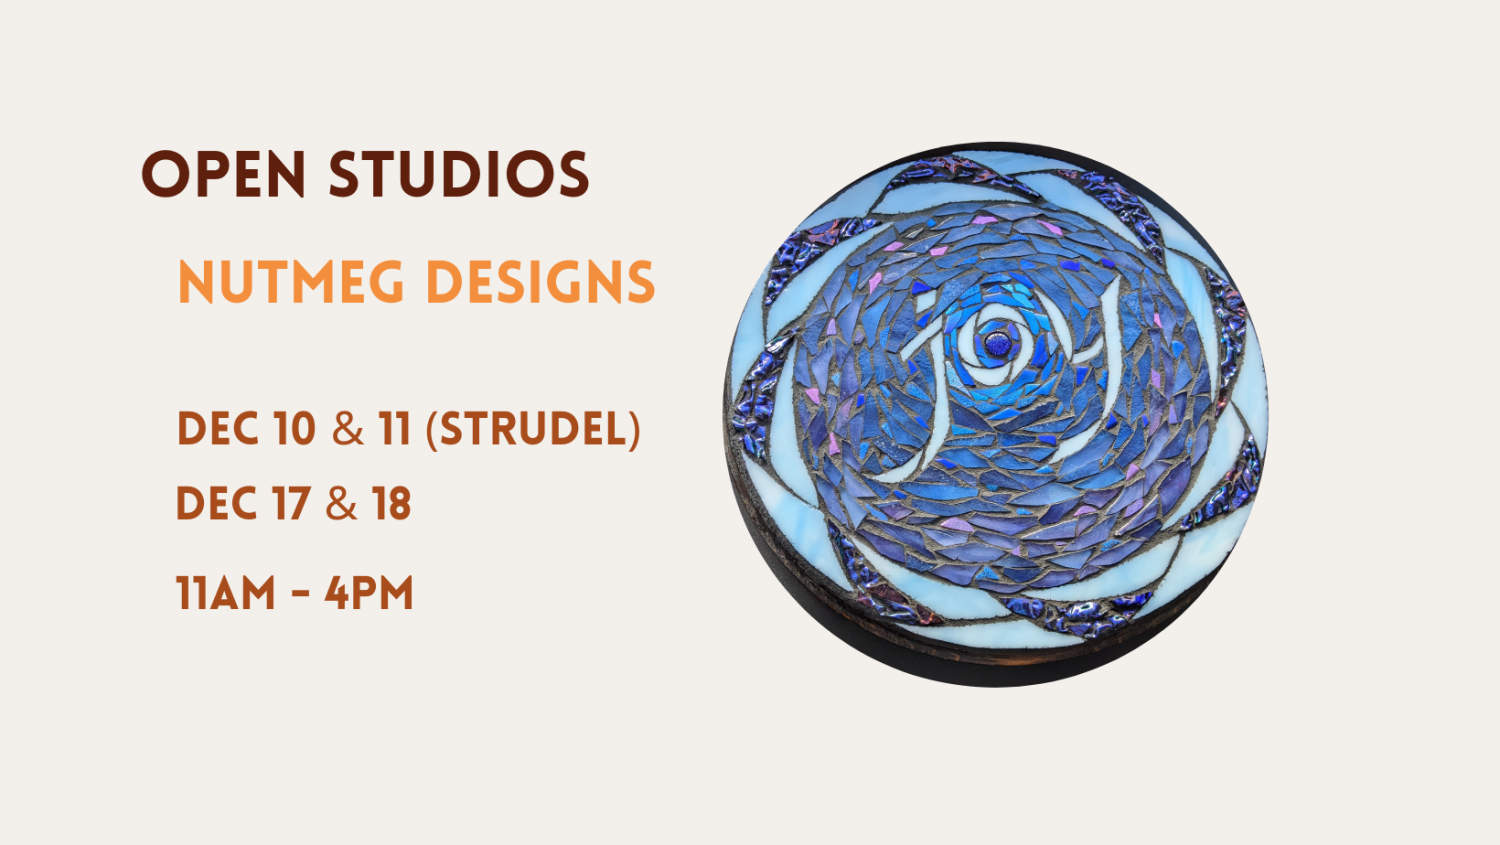 Open Studios at Nutmeg Designs December 10-11 and 17-18 2022